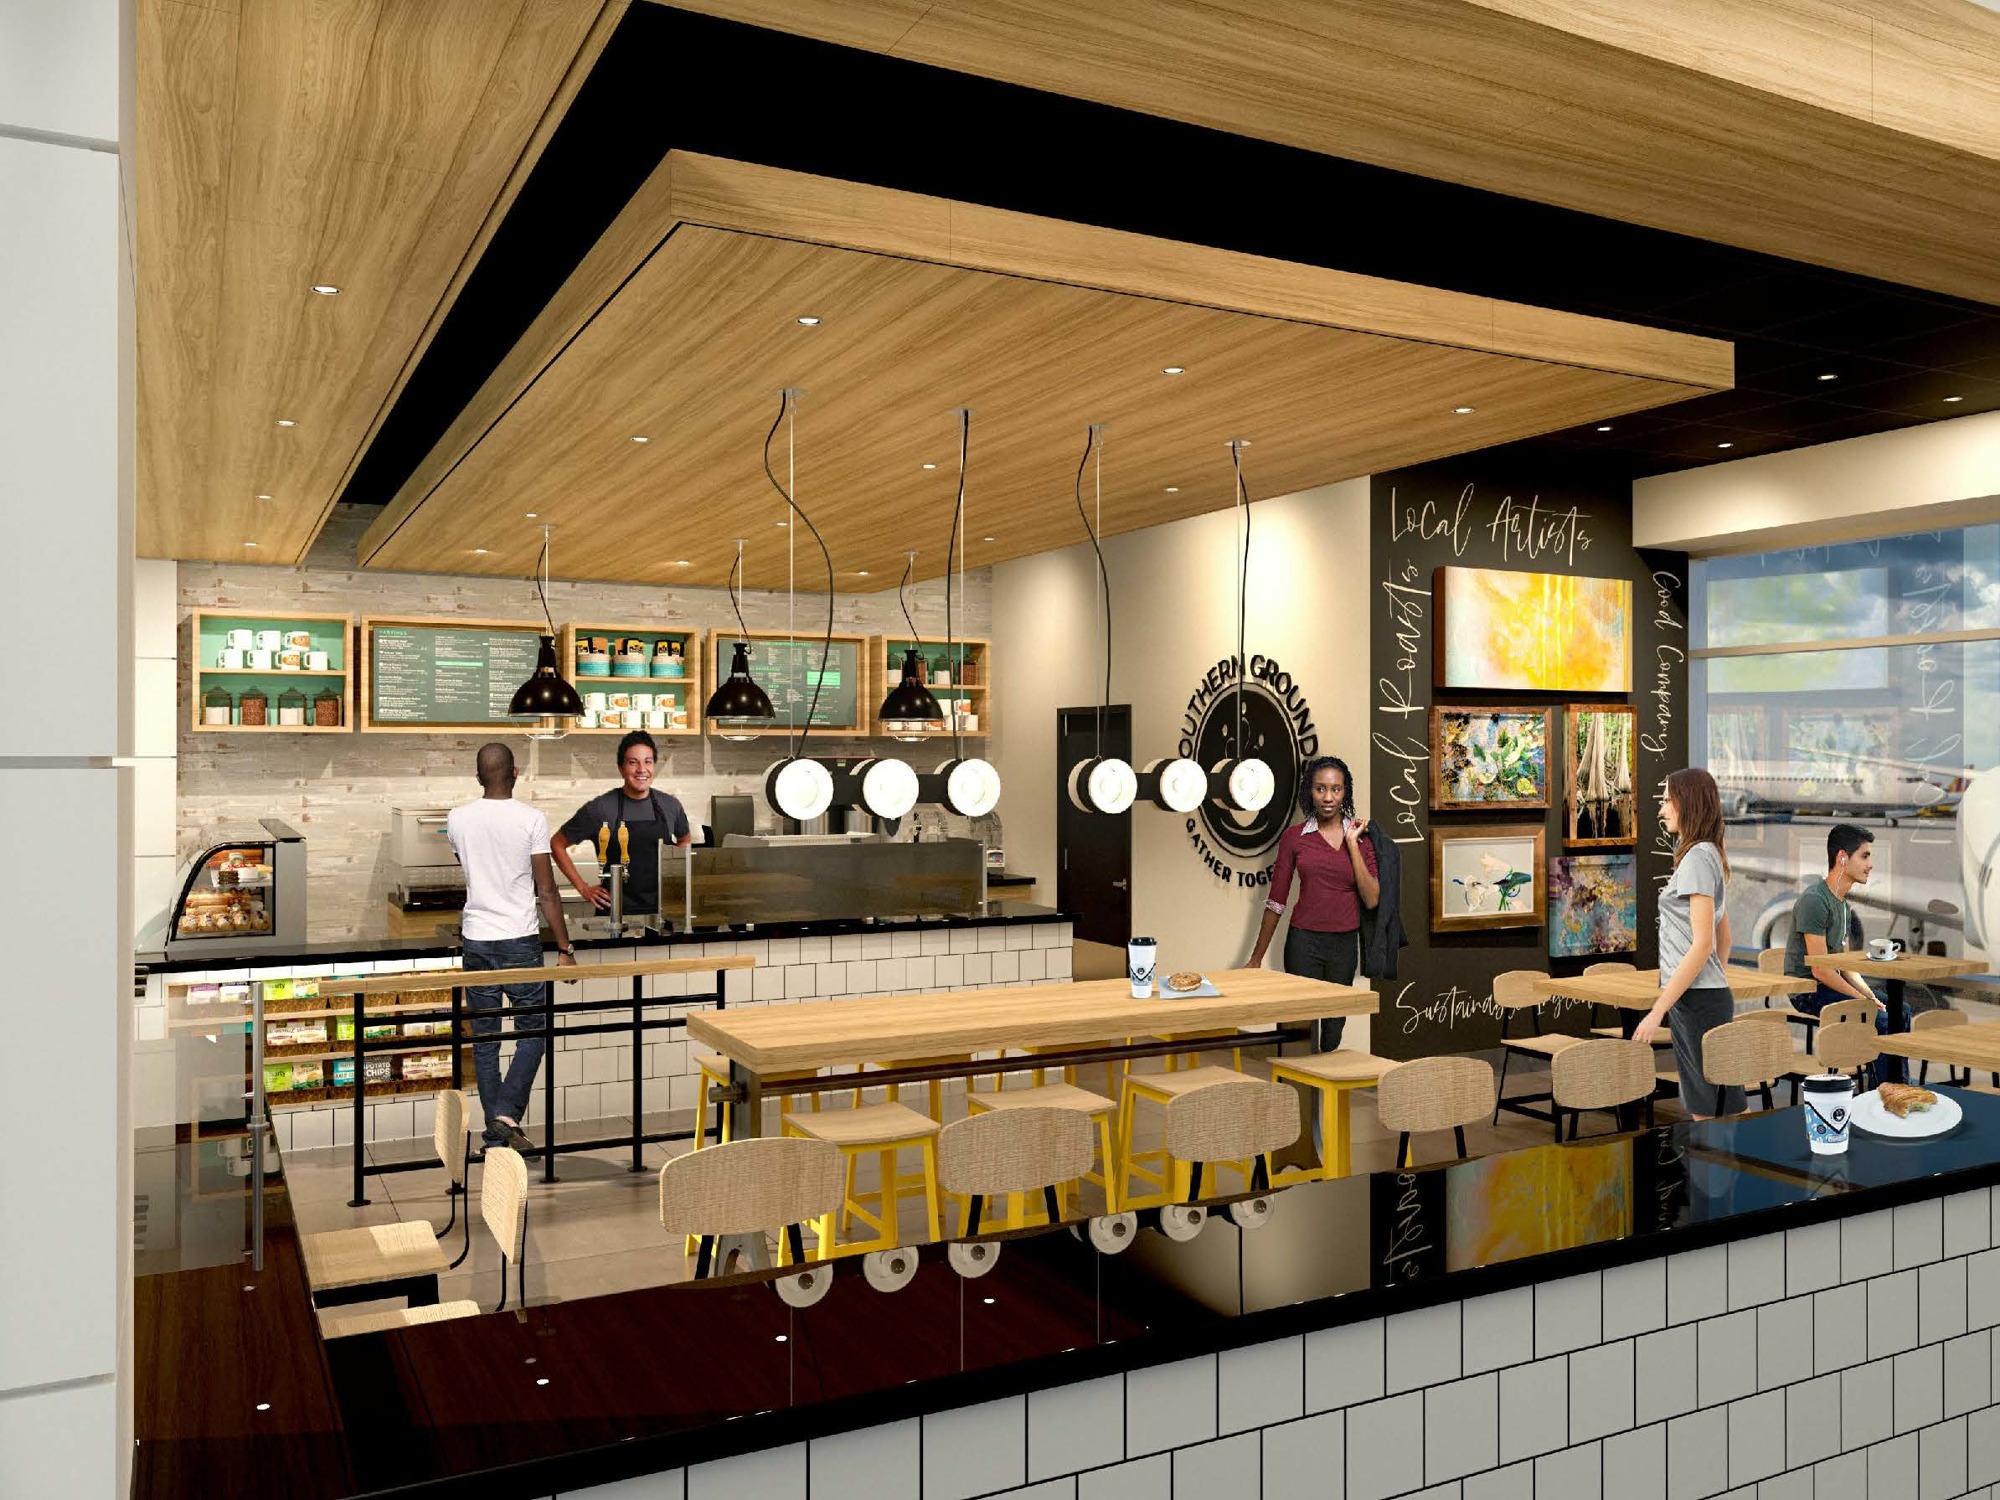 Southern Grounds & Co. will open in Concourse A by the end of the year.